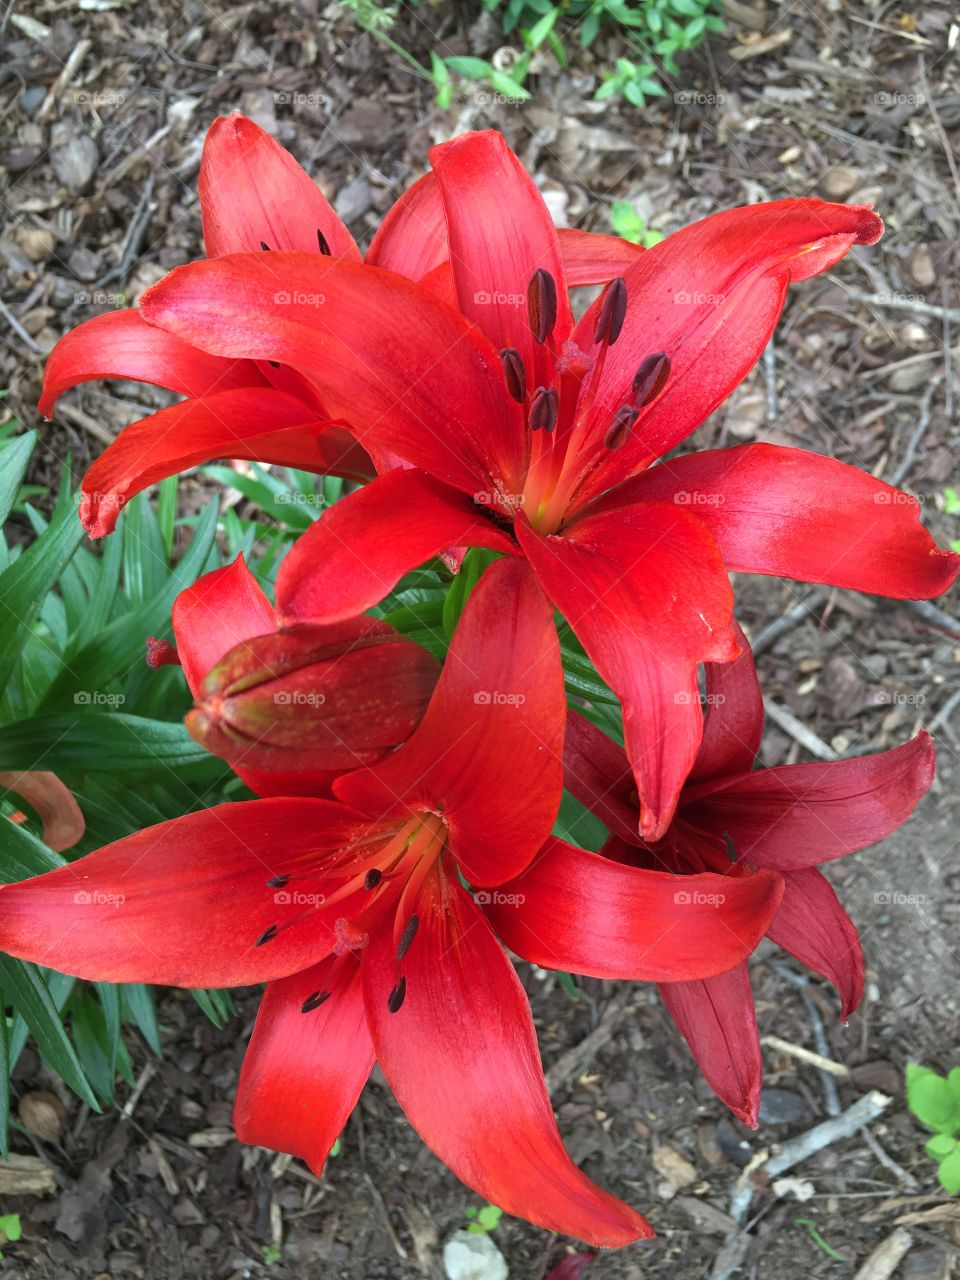 Red lillies 